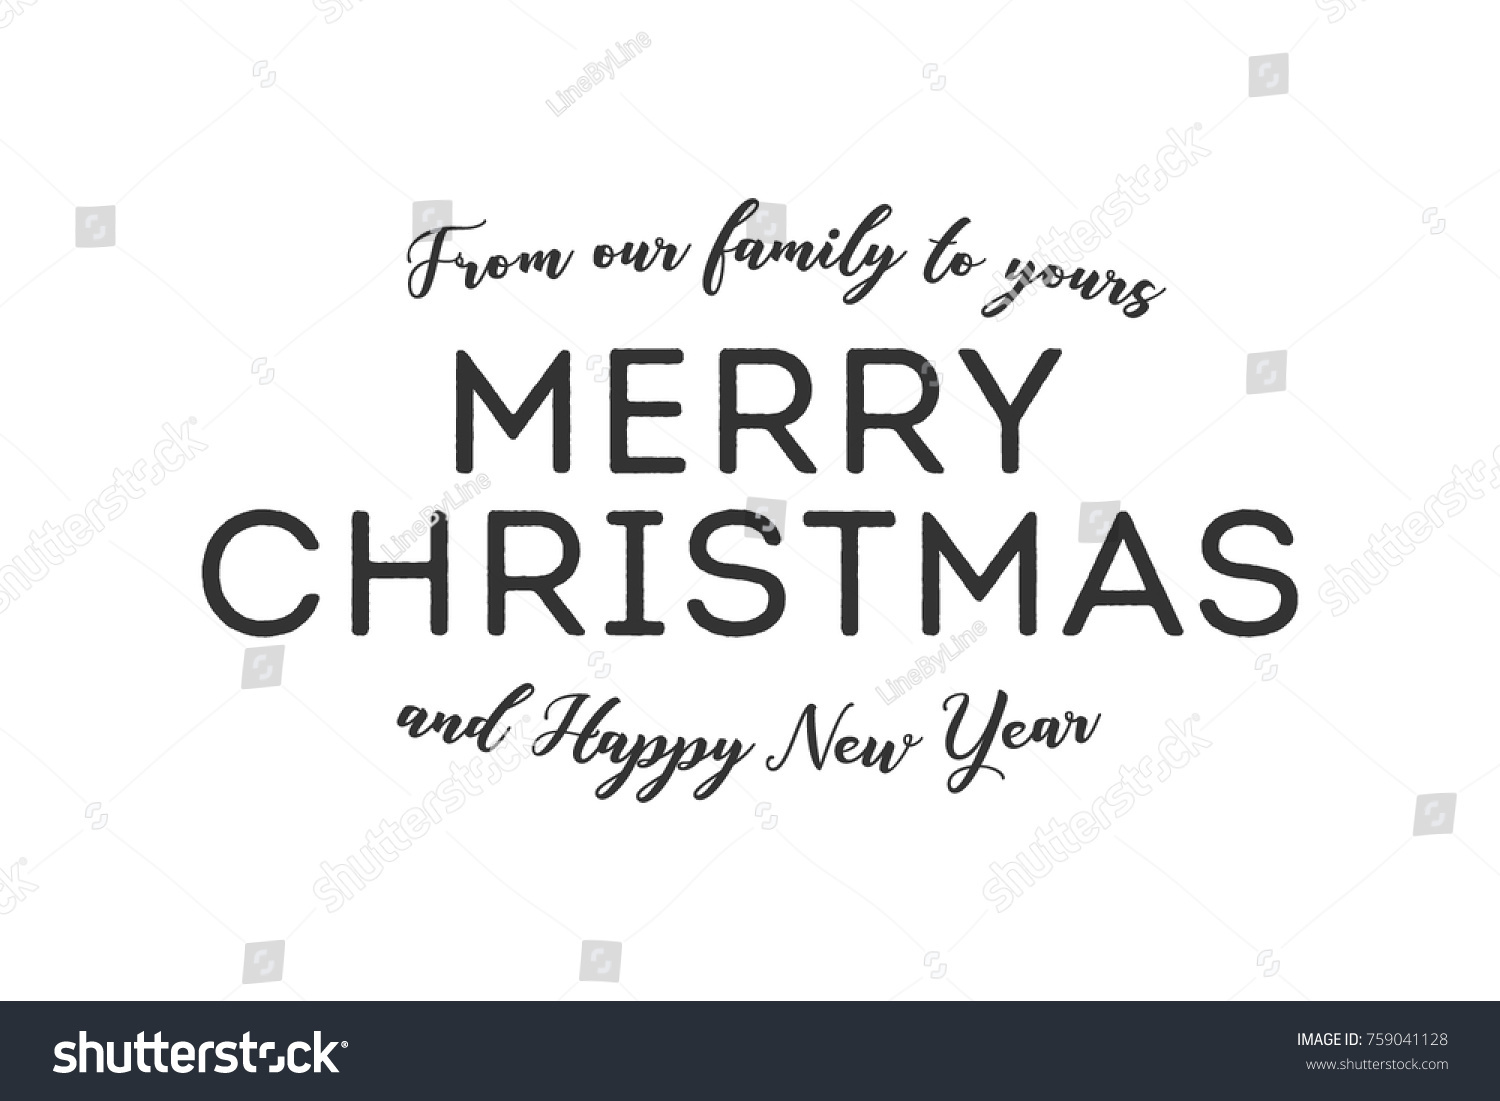 Our Family Yours Merry Christmas Happy Stock Vector 759041128 - Shutterstock